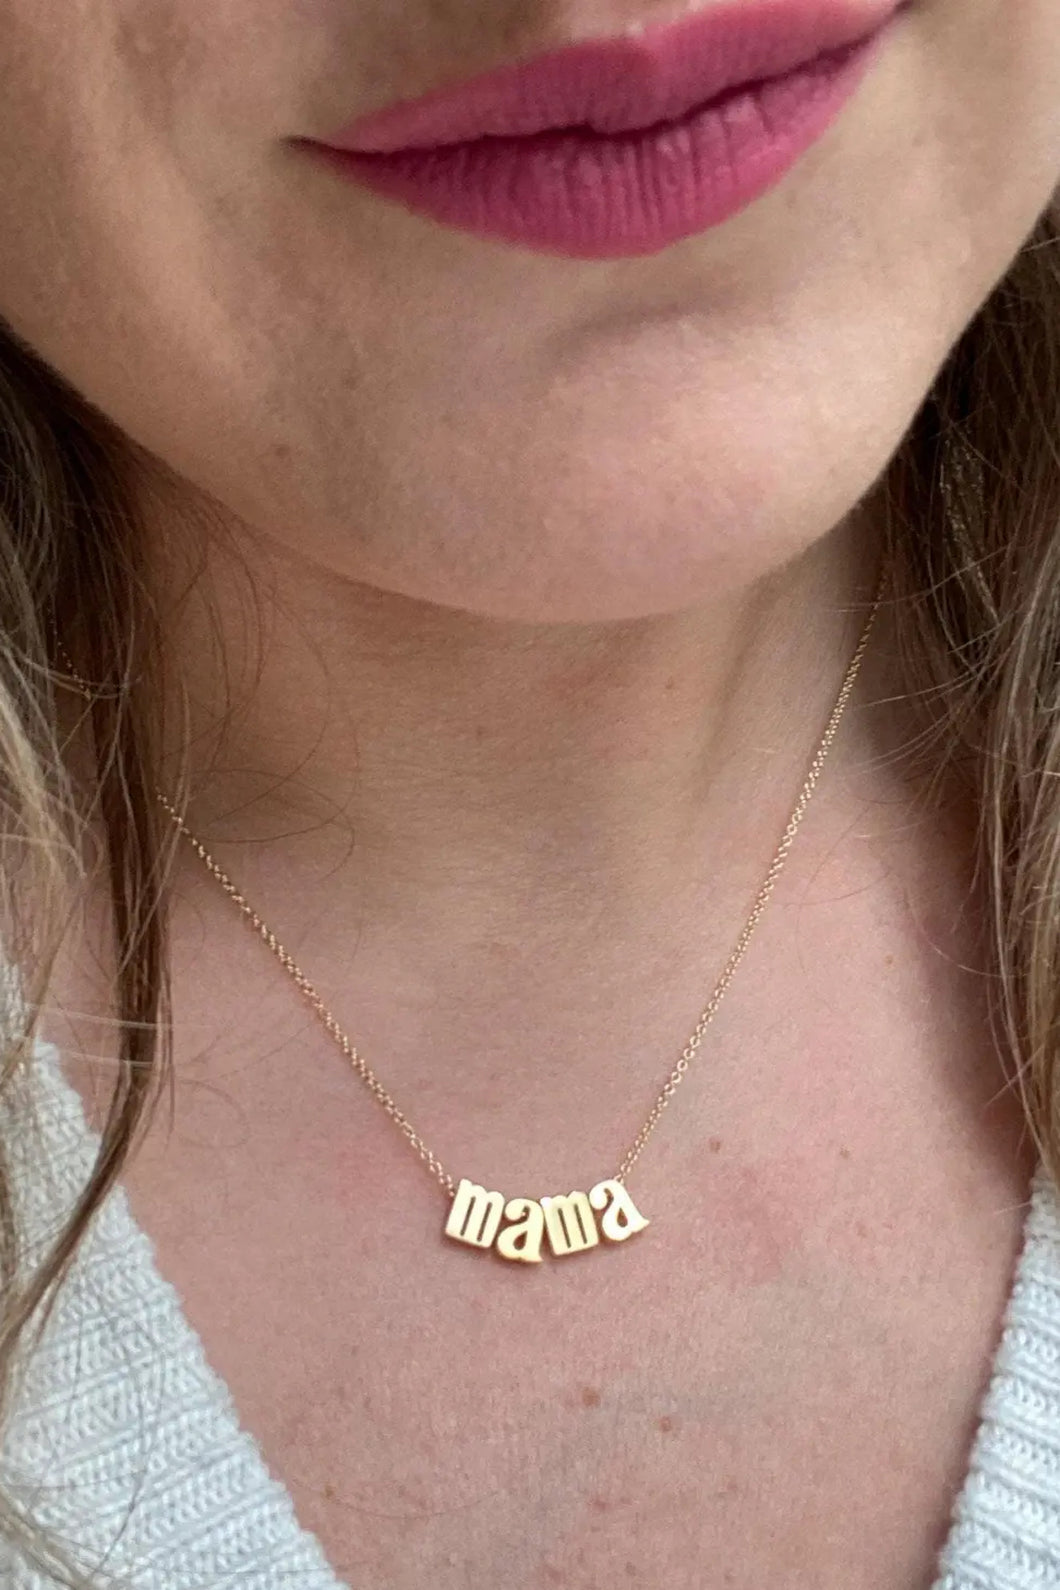 LOWERCASE MAMA NECKLACE